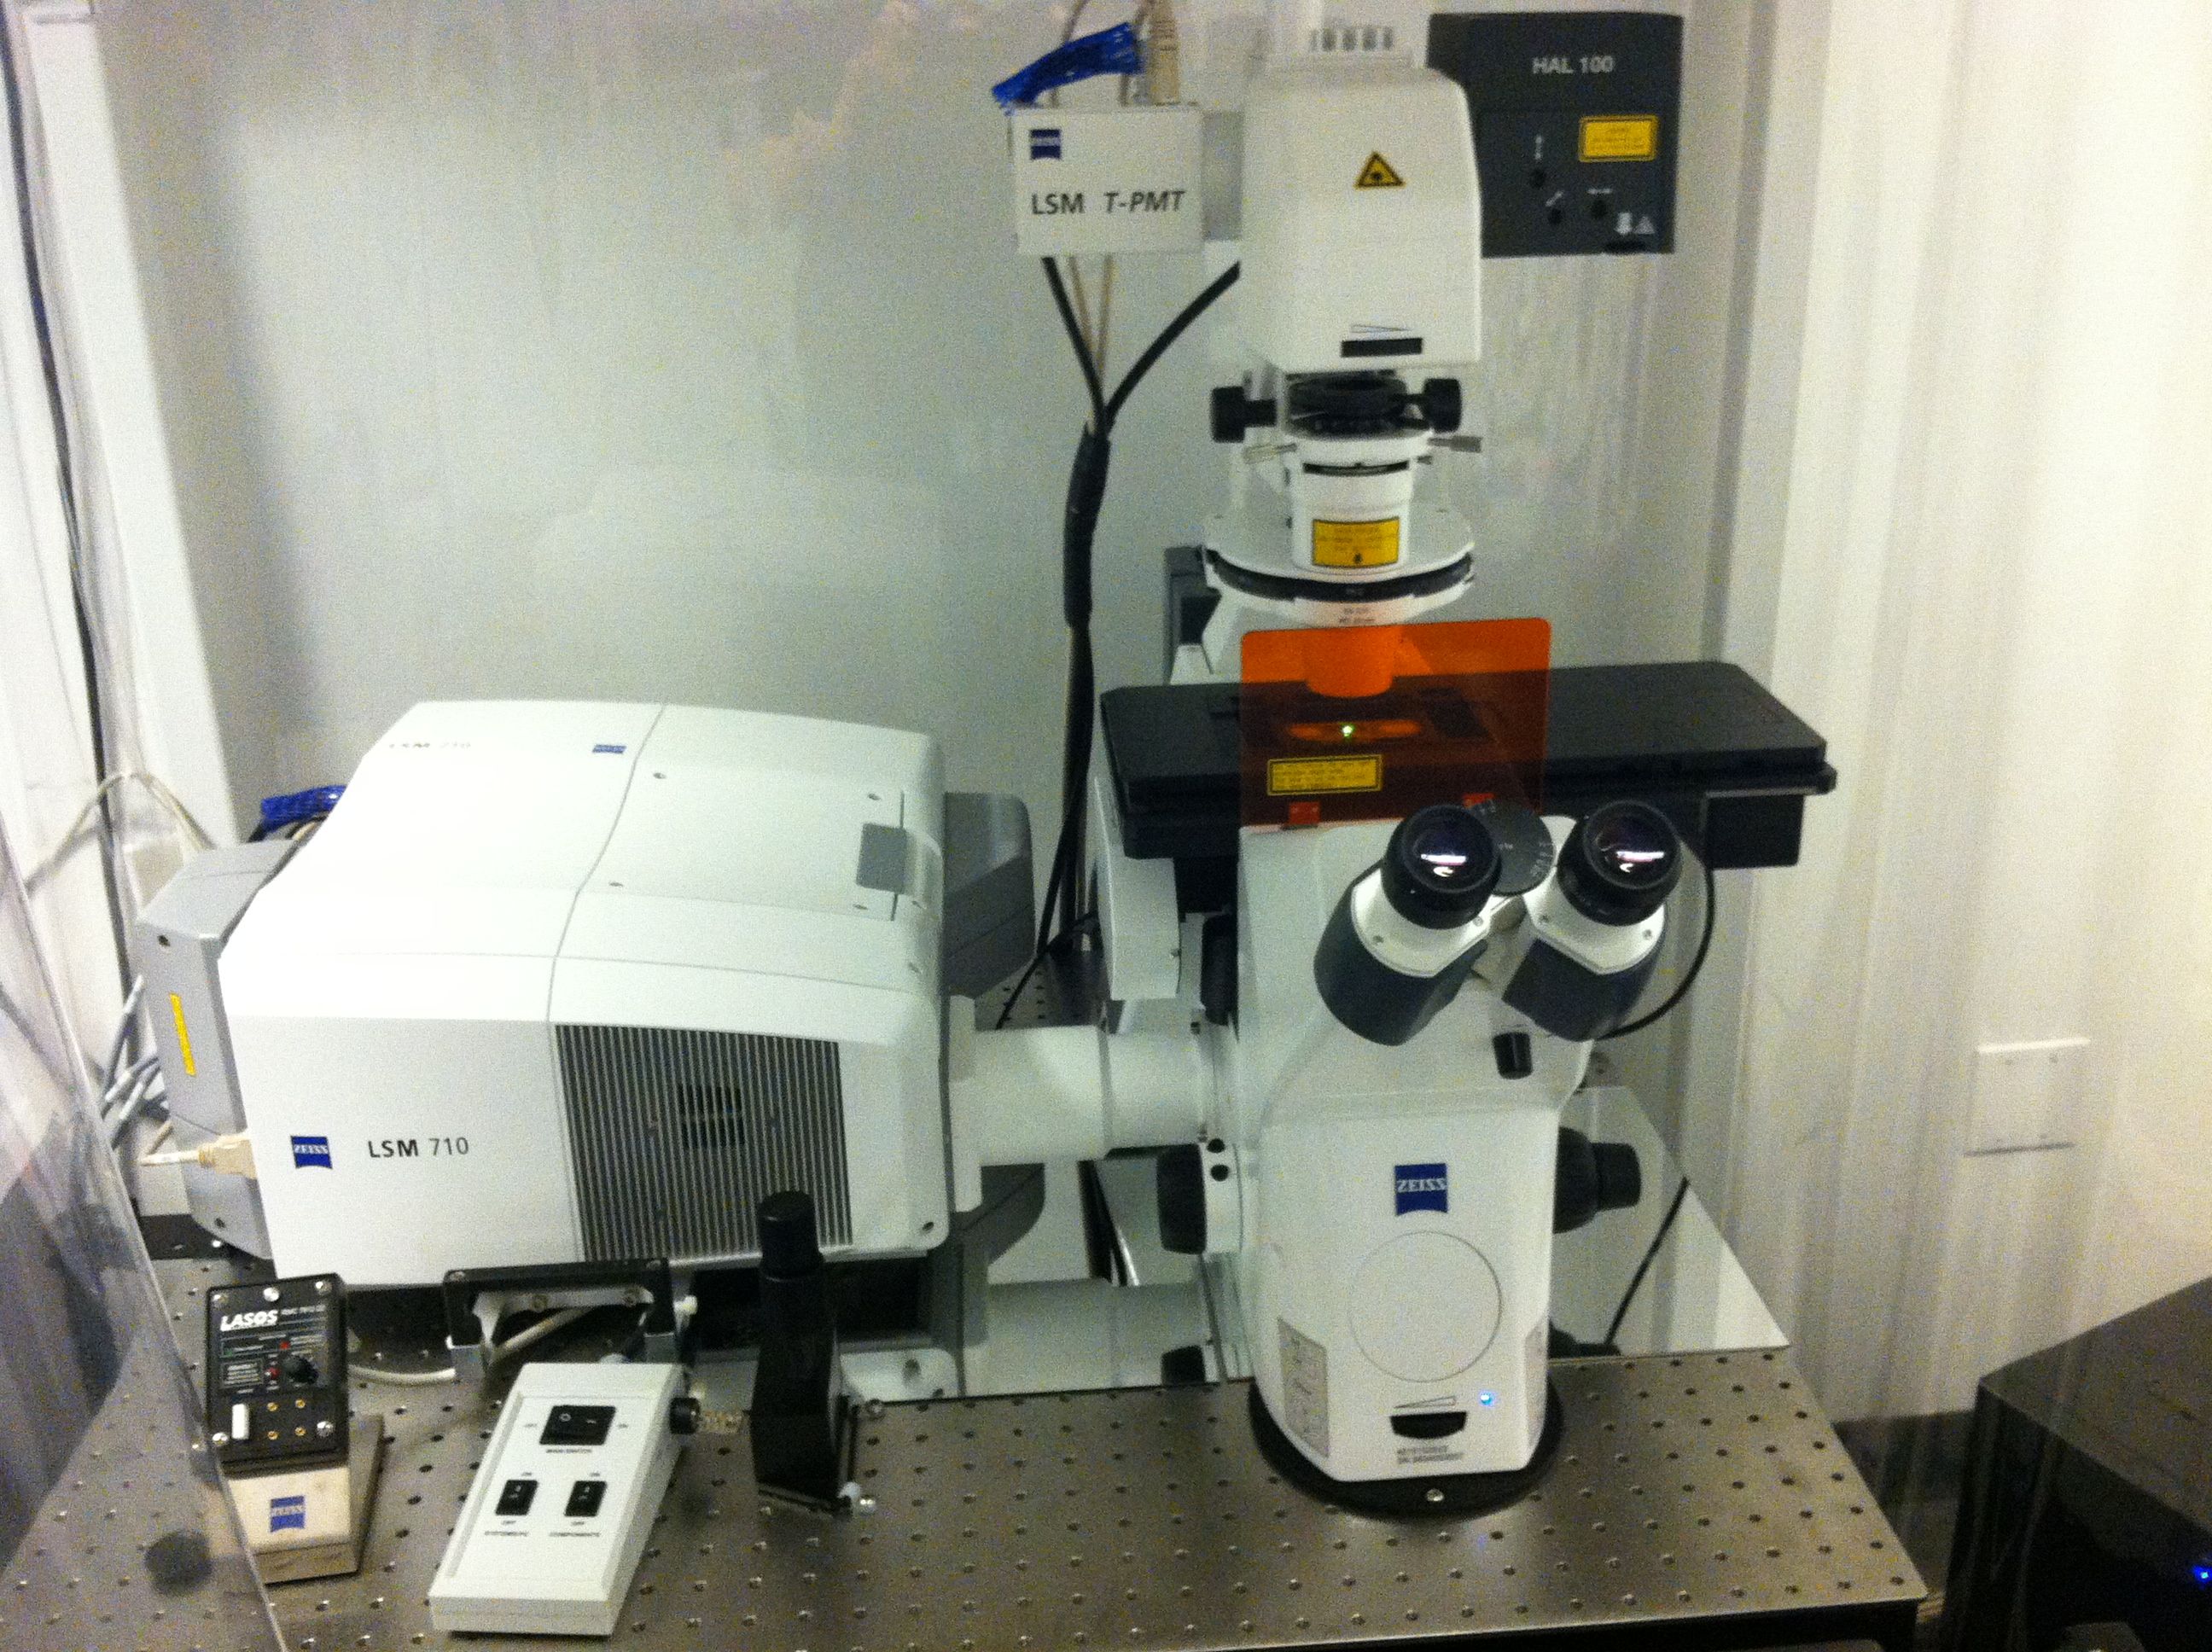 In the Museum’s Microscopy and Imaging Facility, the Zeiss LSM 710 confocal laser scanning microscope.